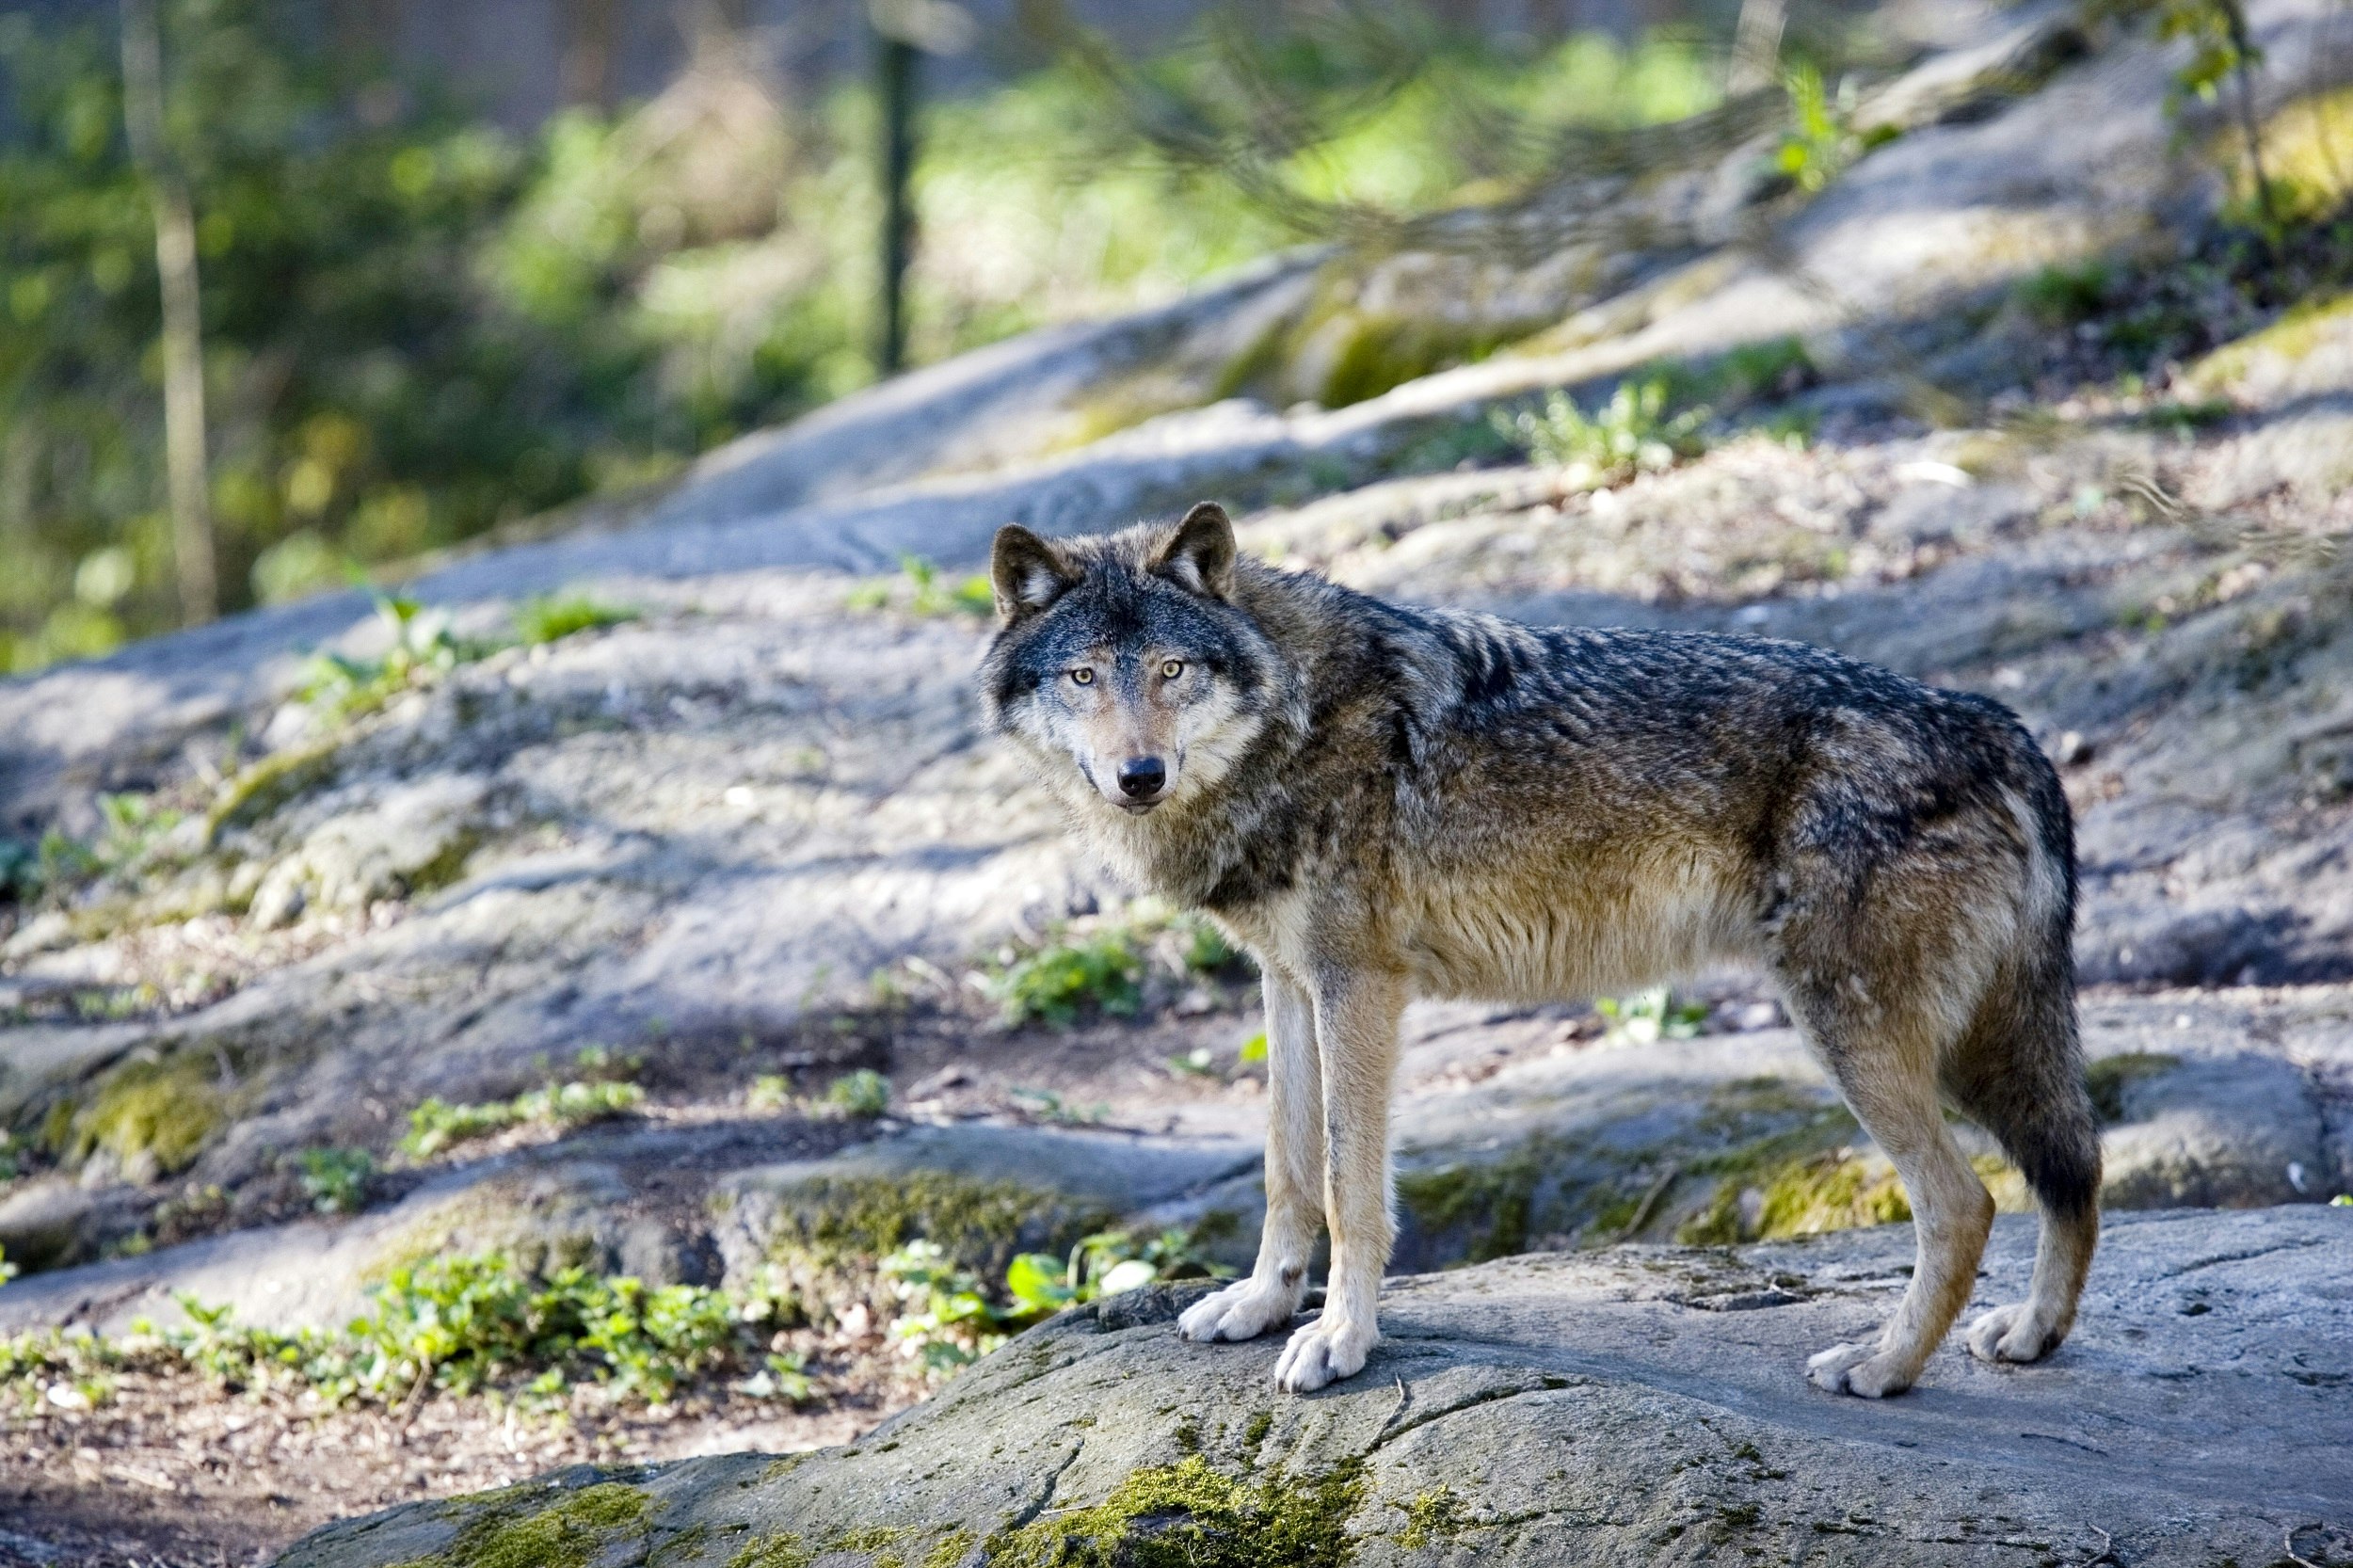 A wolf stands side on, looking at the camera; it's standing on a rocky outcrop in a forest.